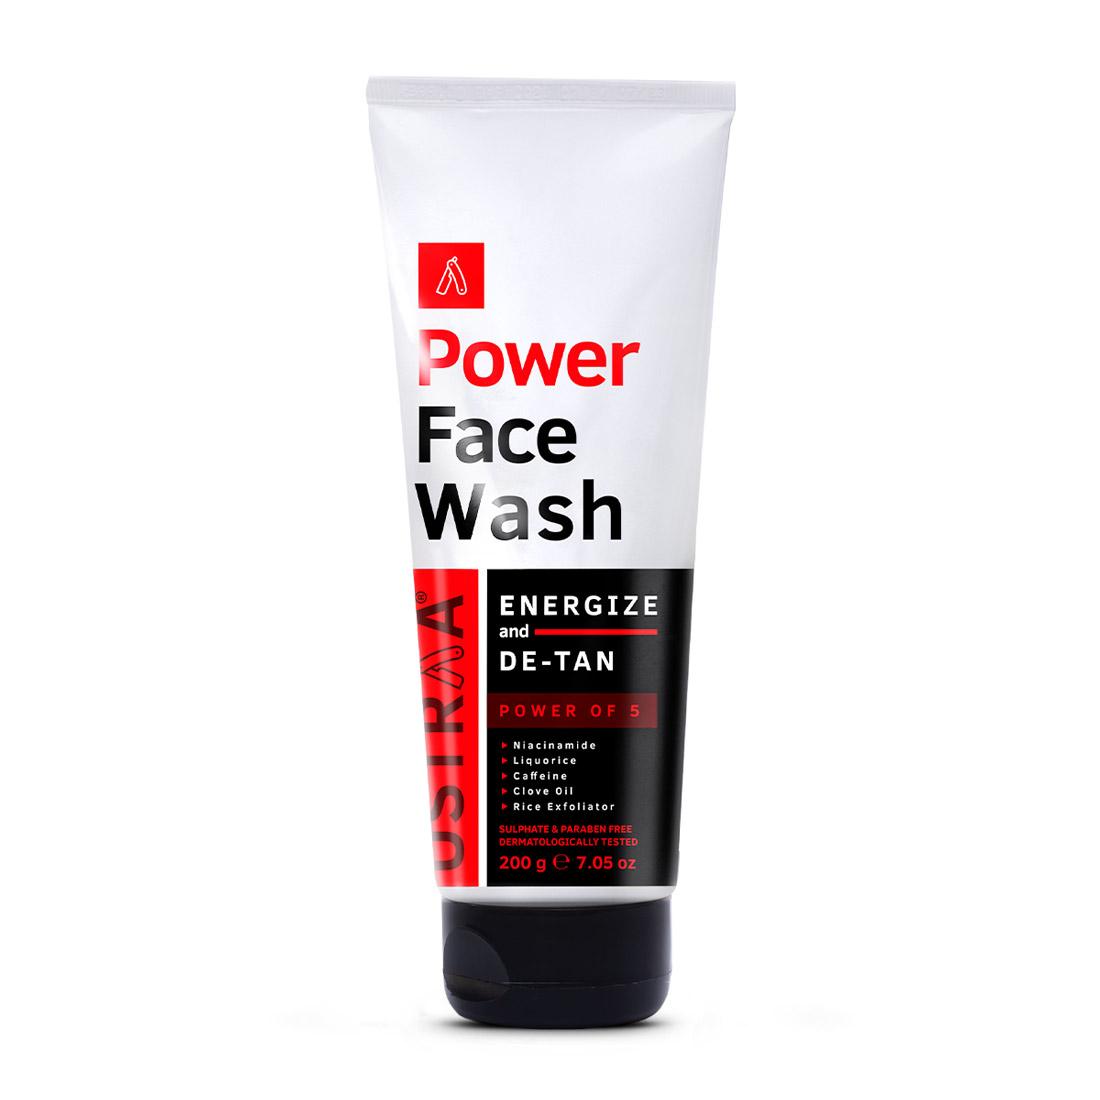 Power Face Wash Energize and De-Tan Helps Keep Your Skin Tan-Free, Reduce Wrinkles and Clears Out Skin Pores 